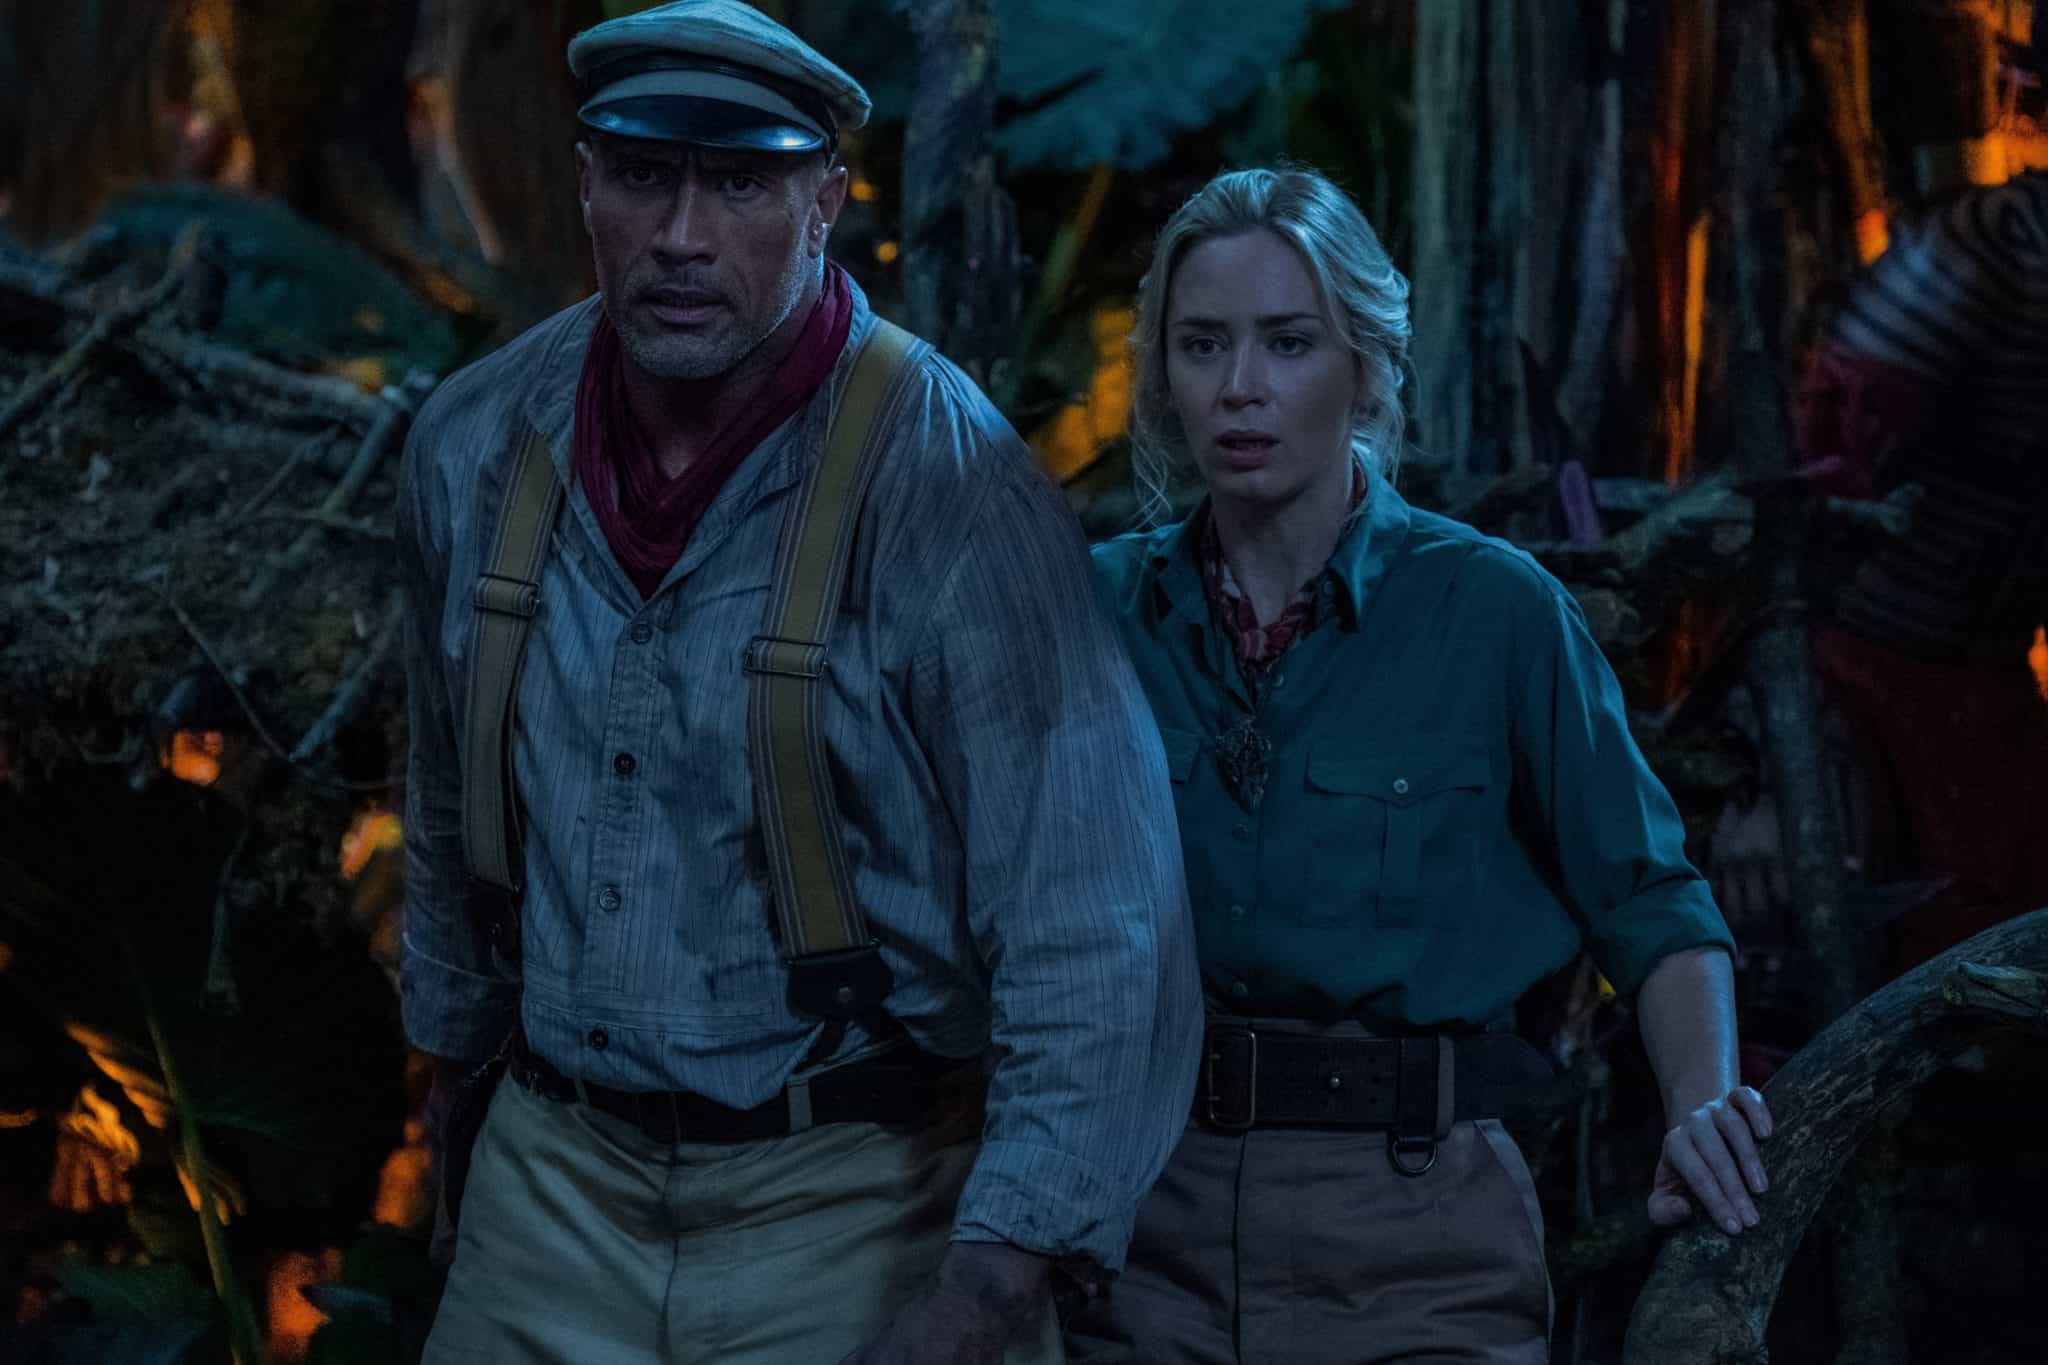 Disney's Jungle Cruise is the perfect family movie for Indiana Jones and Pirates of the Caribbean fans. Here are more reasons to watch it!